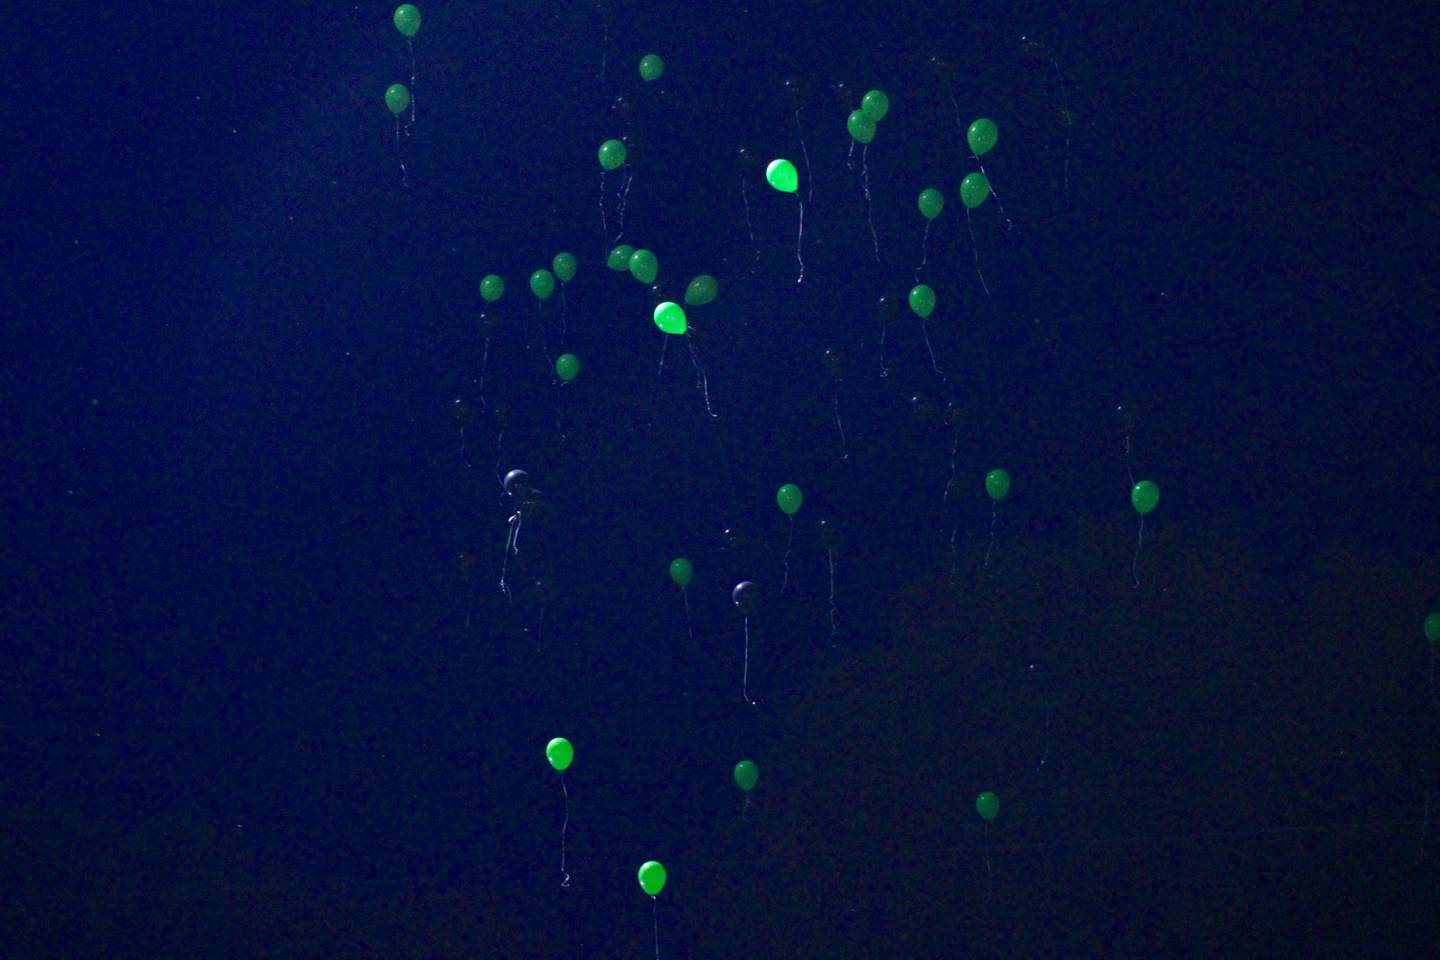 Balloons were launched during the pregame ceremony on Friday, Oct. 8, 2021, to honor the memory of Rock Falls lineman Brock Parker, who died Sept. 24.